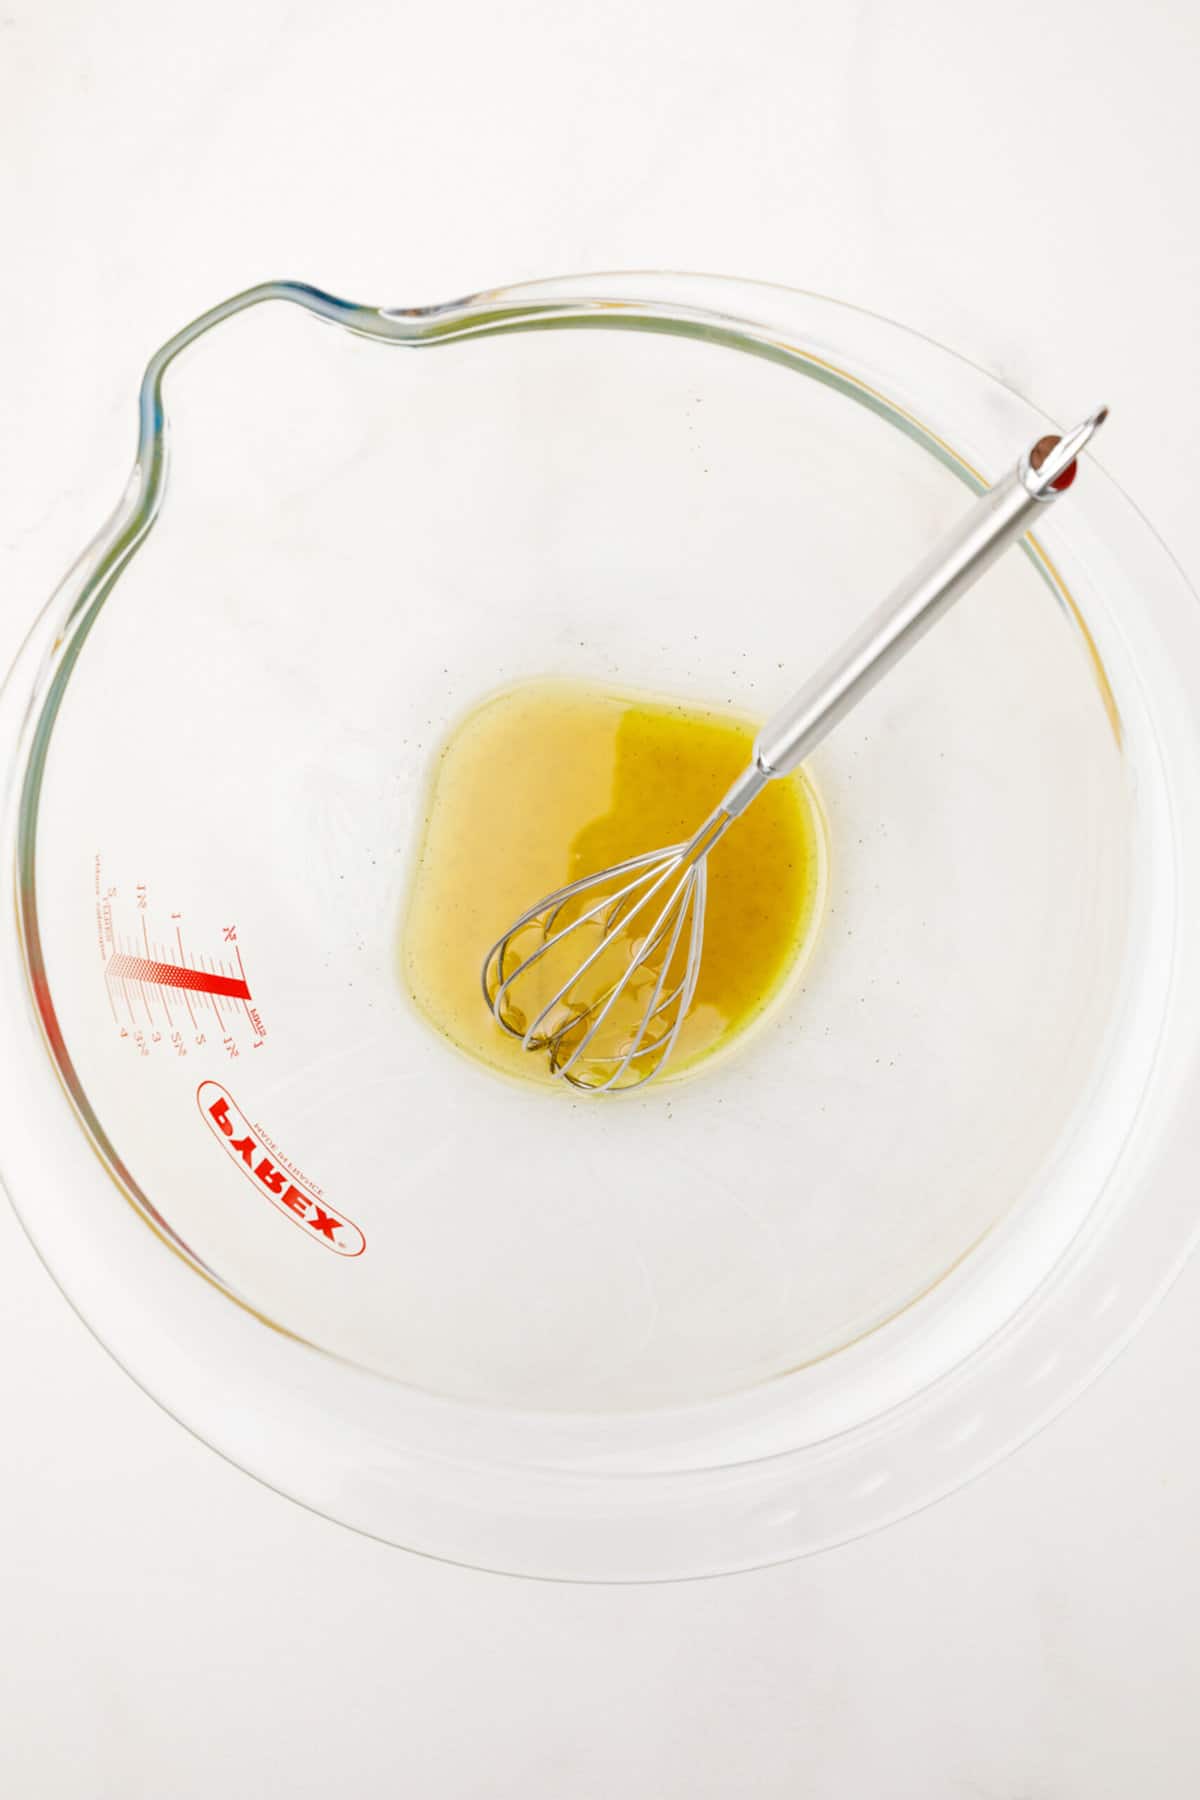 olive oil, vinegar, salt and pepper dressing sitting in a large clear mixing bowl with a metal whisk